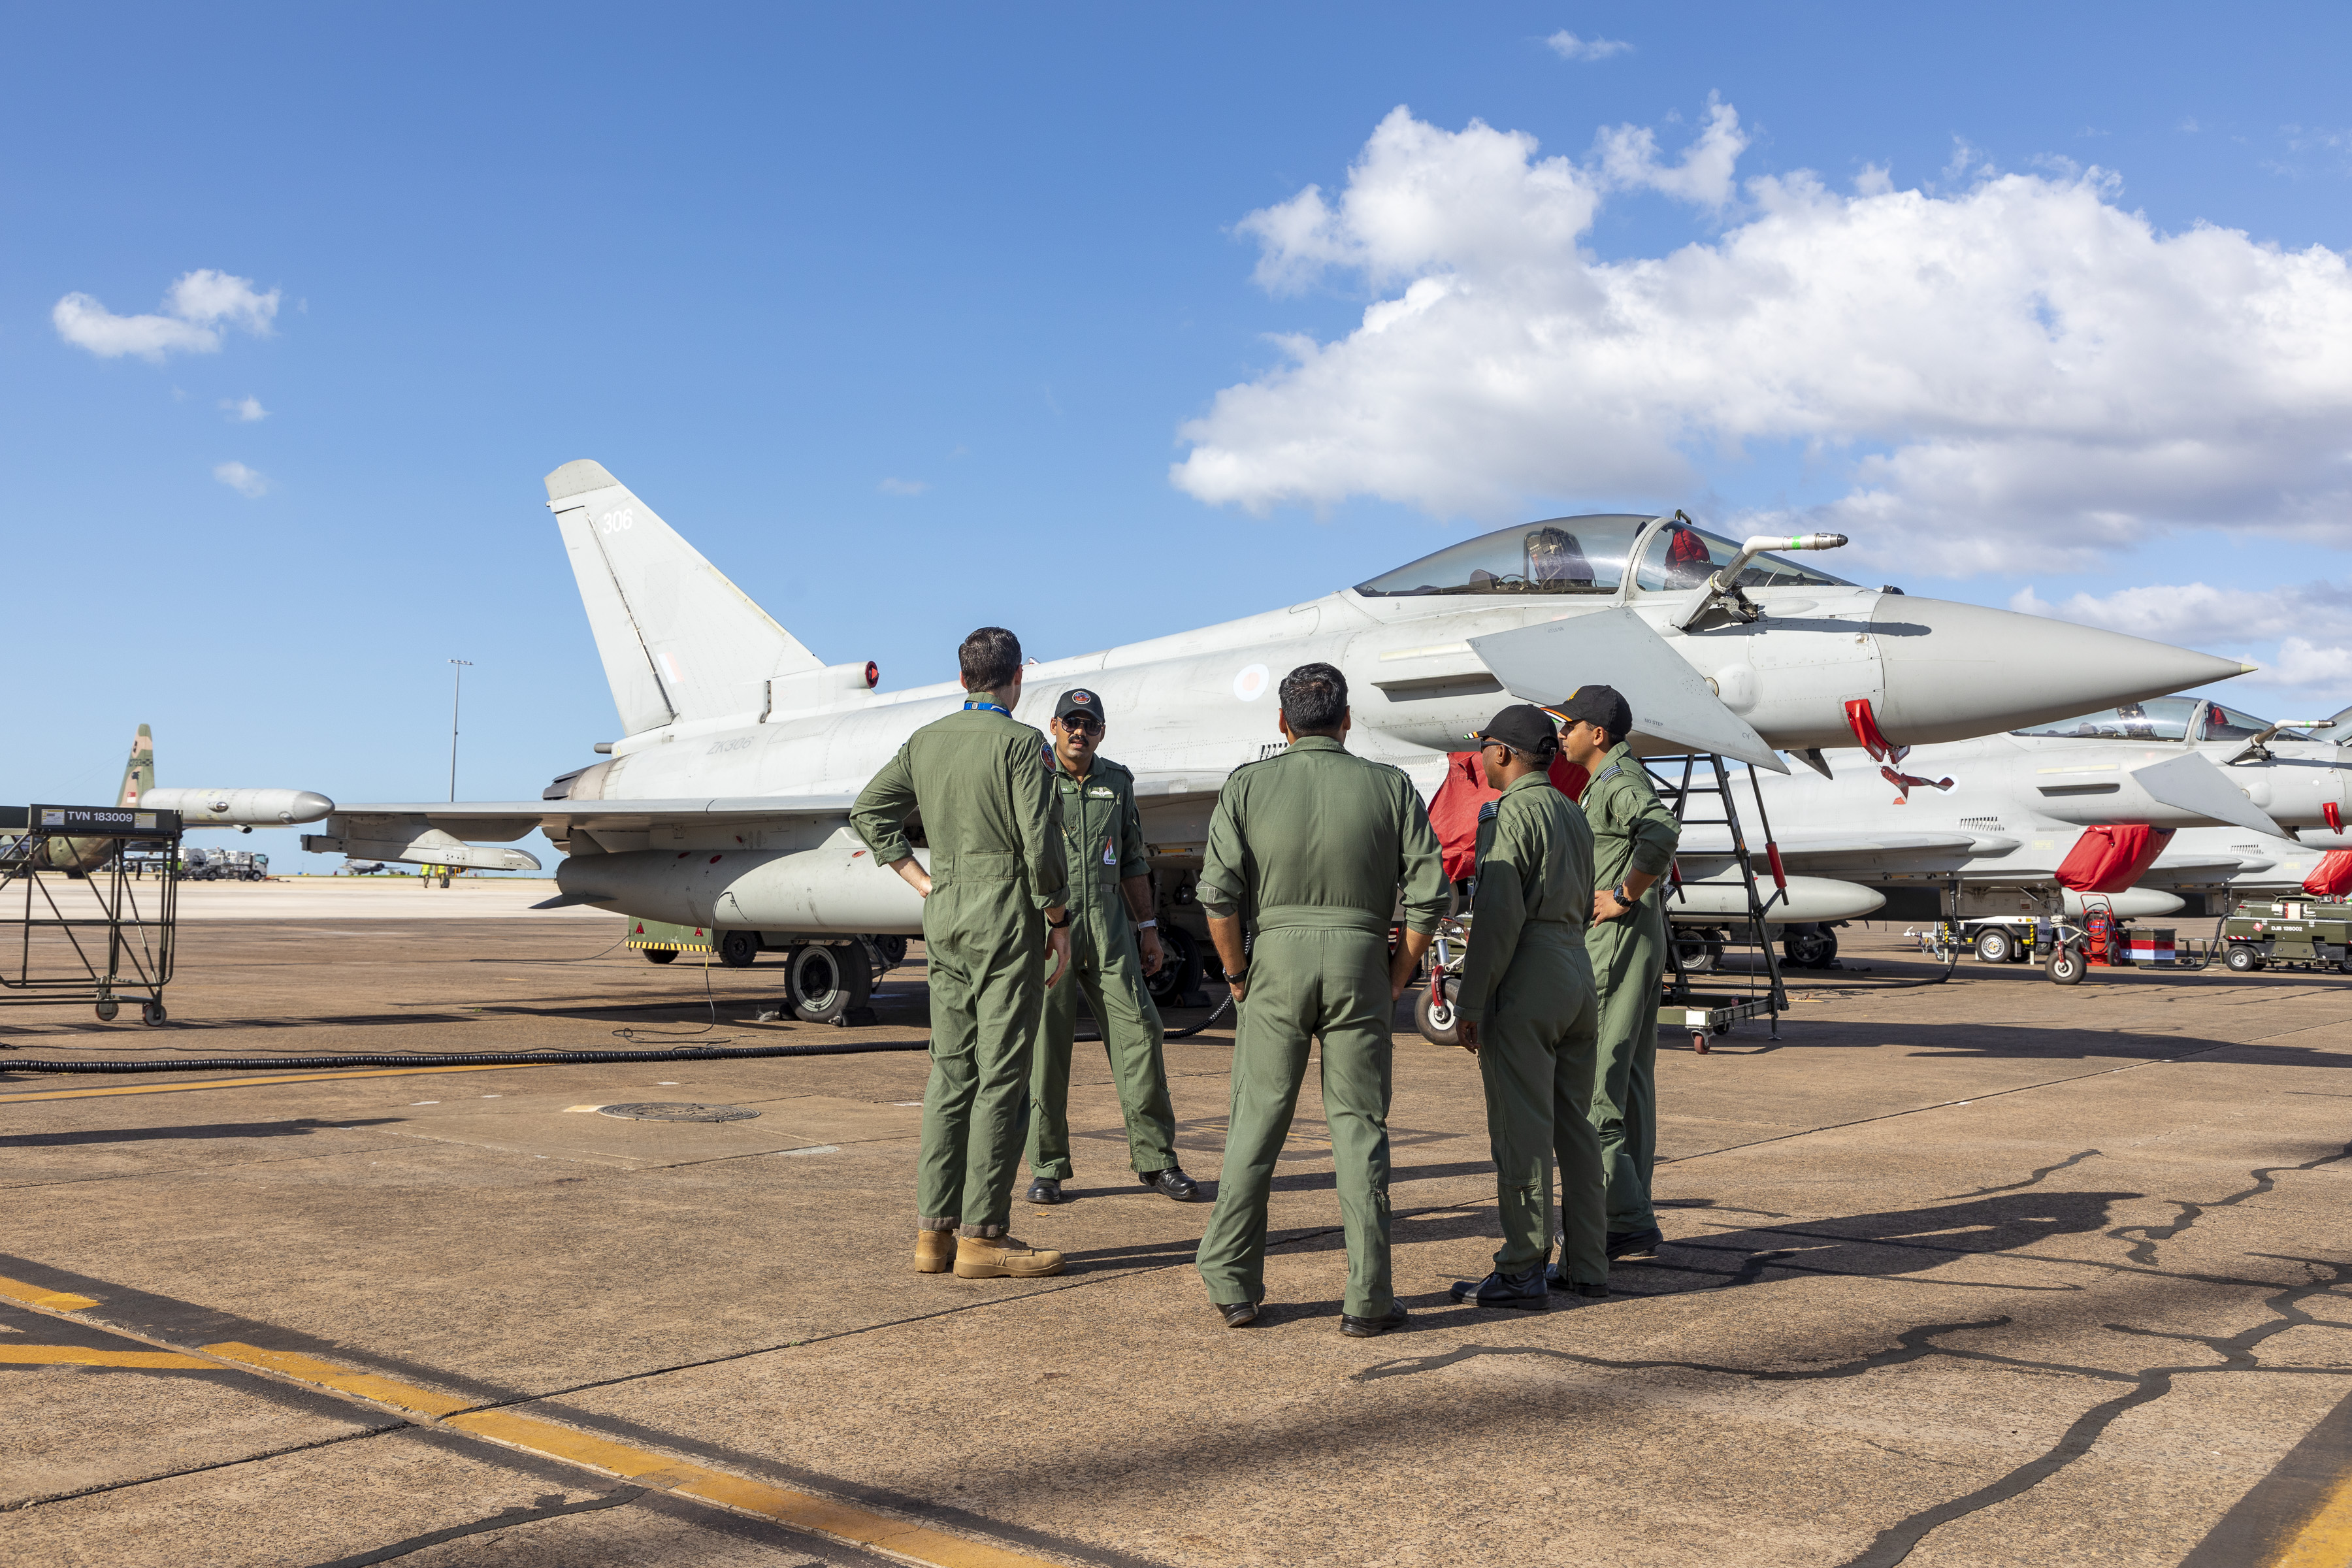 Image shows group of RAF aviators standing by Typhoons on an airfield.